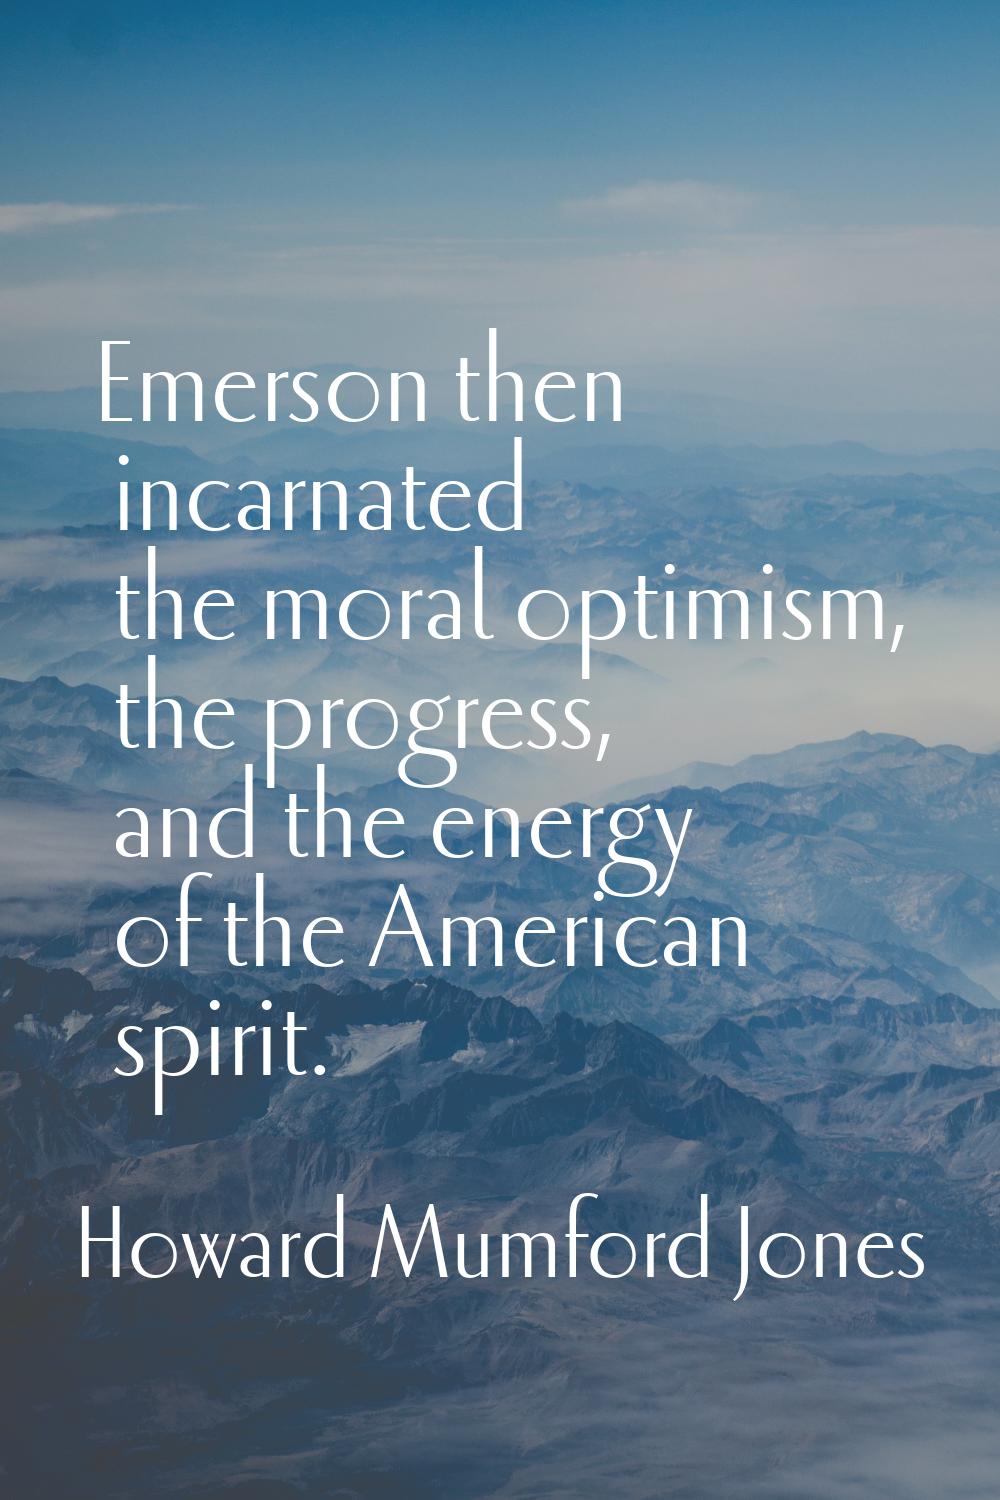 Emerson then incarnated the moral optimism, the progress, and the energy of the American spirit.